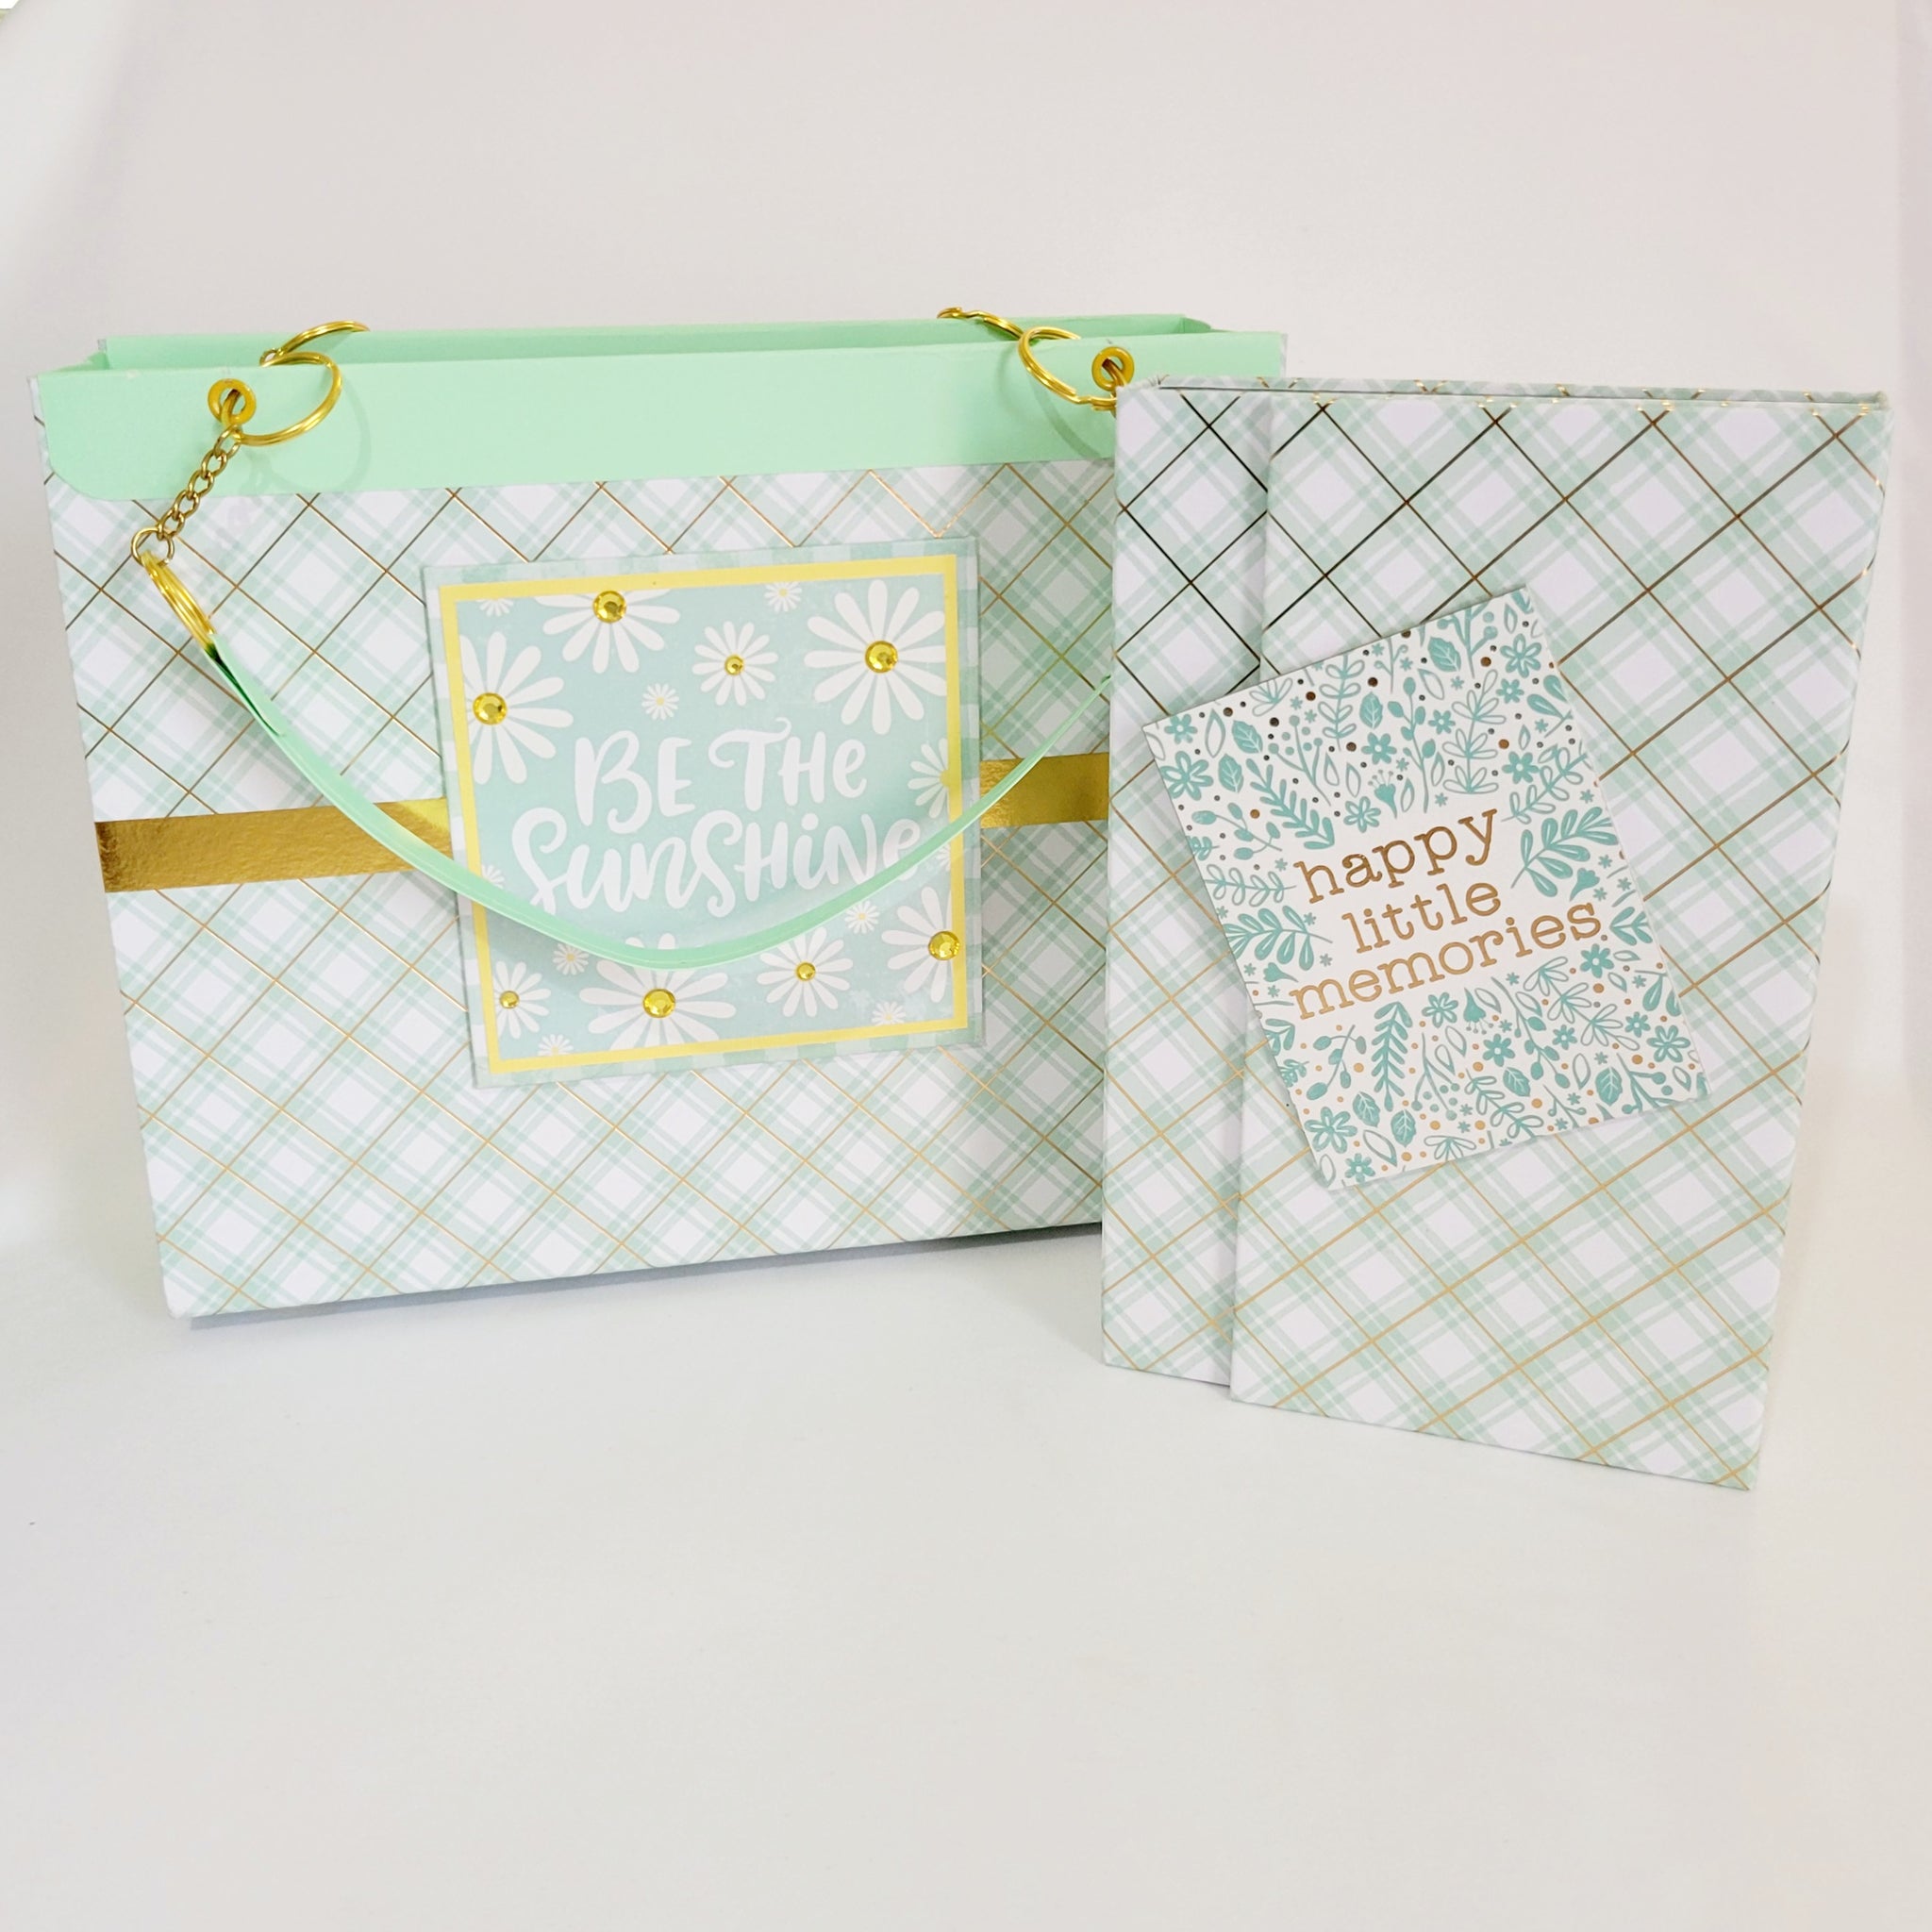 Mint and Gold Purse and Stationery Set